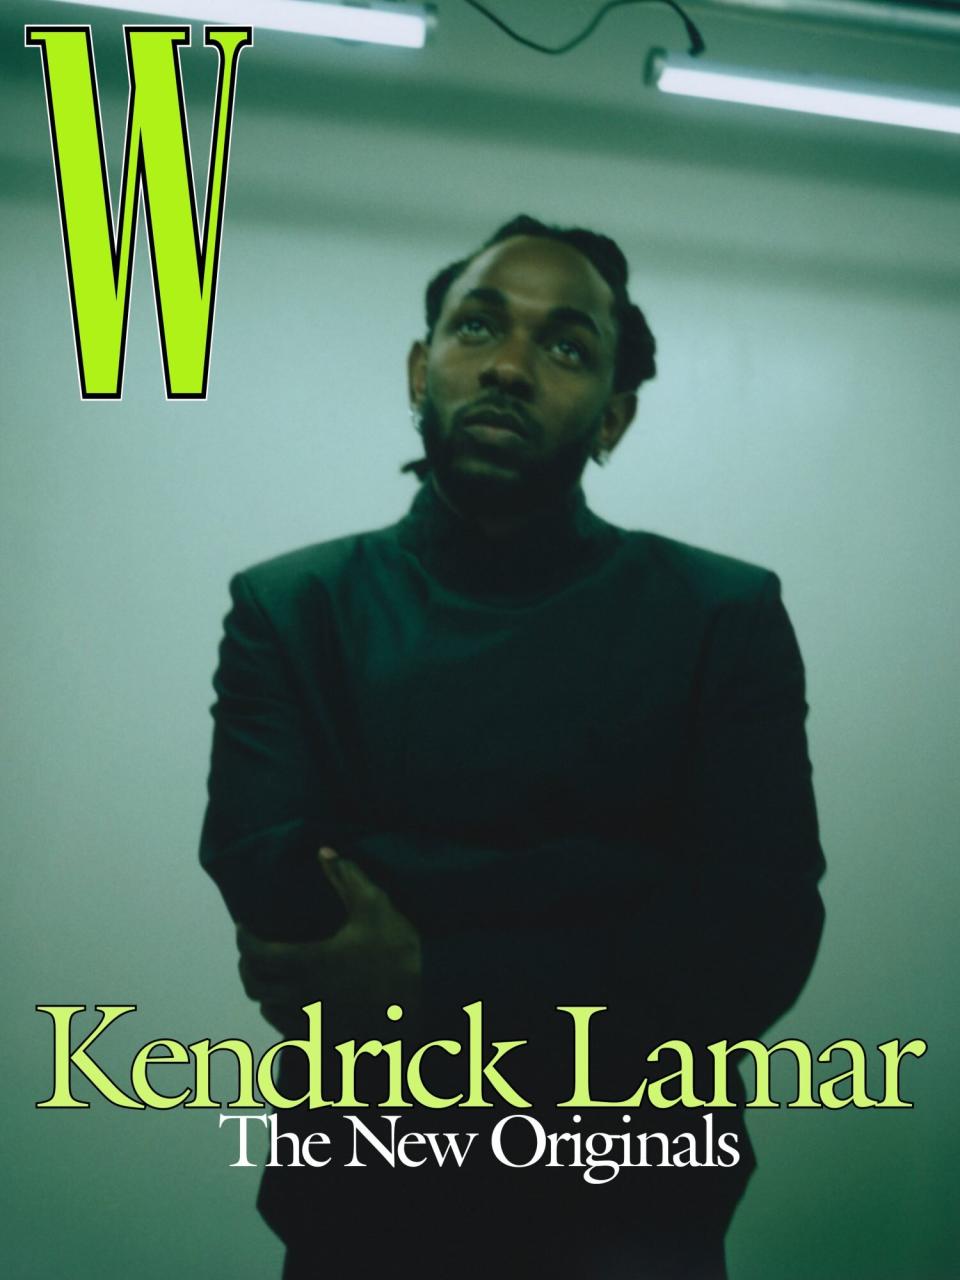 Kendrick Lamar Says His Children ‘Removed’ His ‘Ego’ and Taught Him to ‘Understand Unconditional Love’ Photographed by Renell Medrano/W Magazine